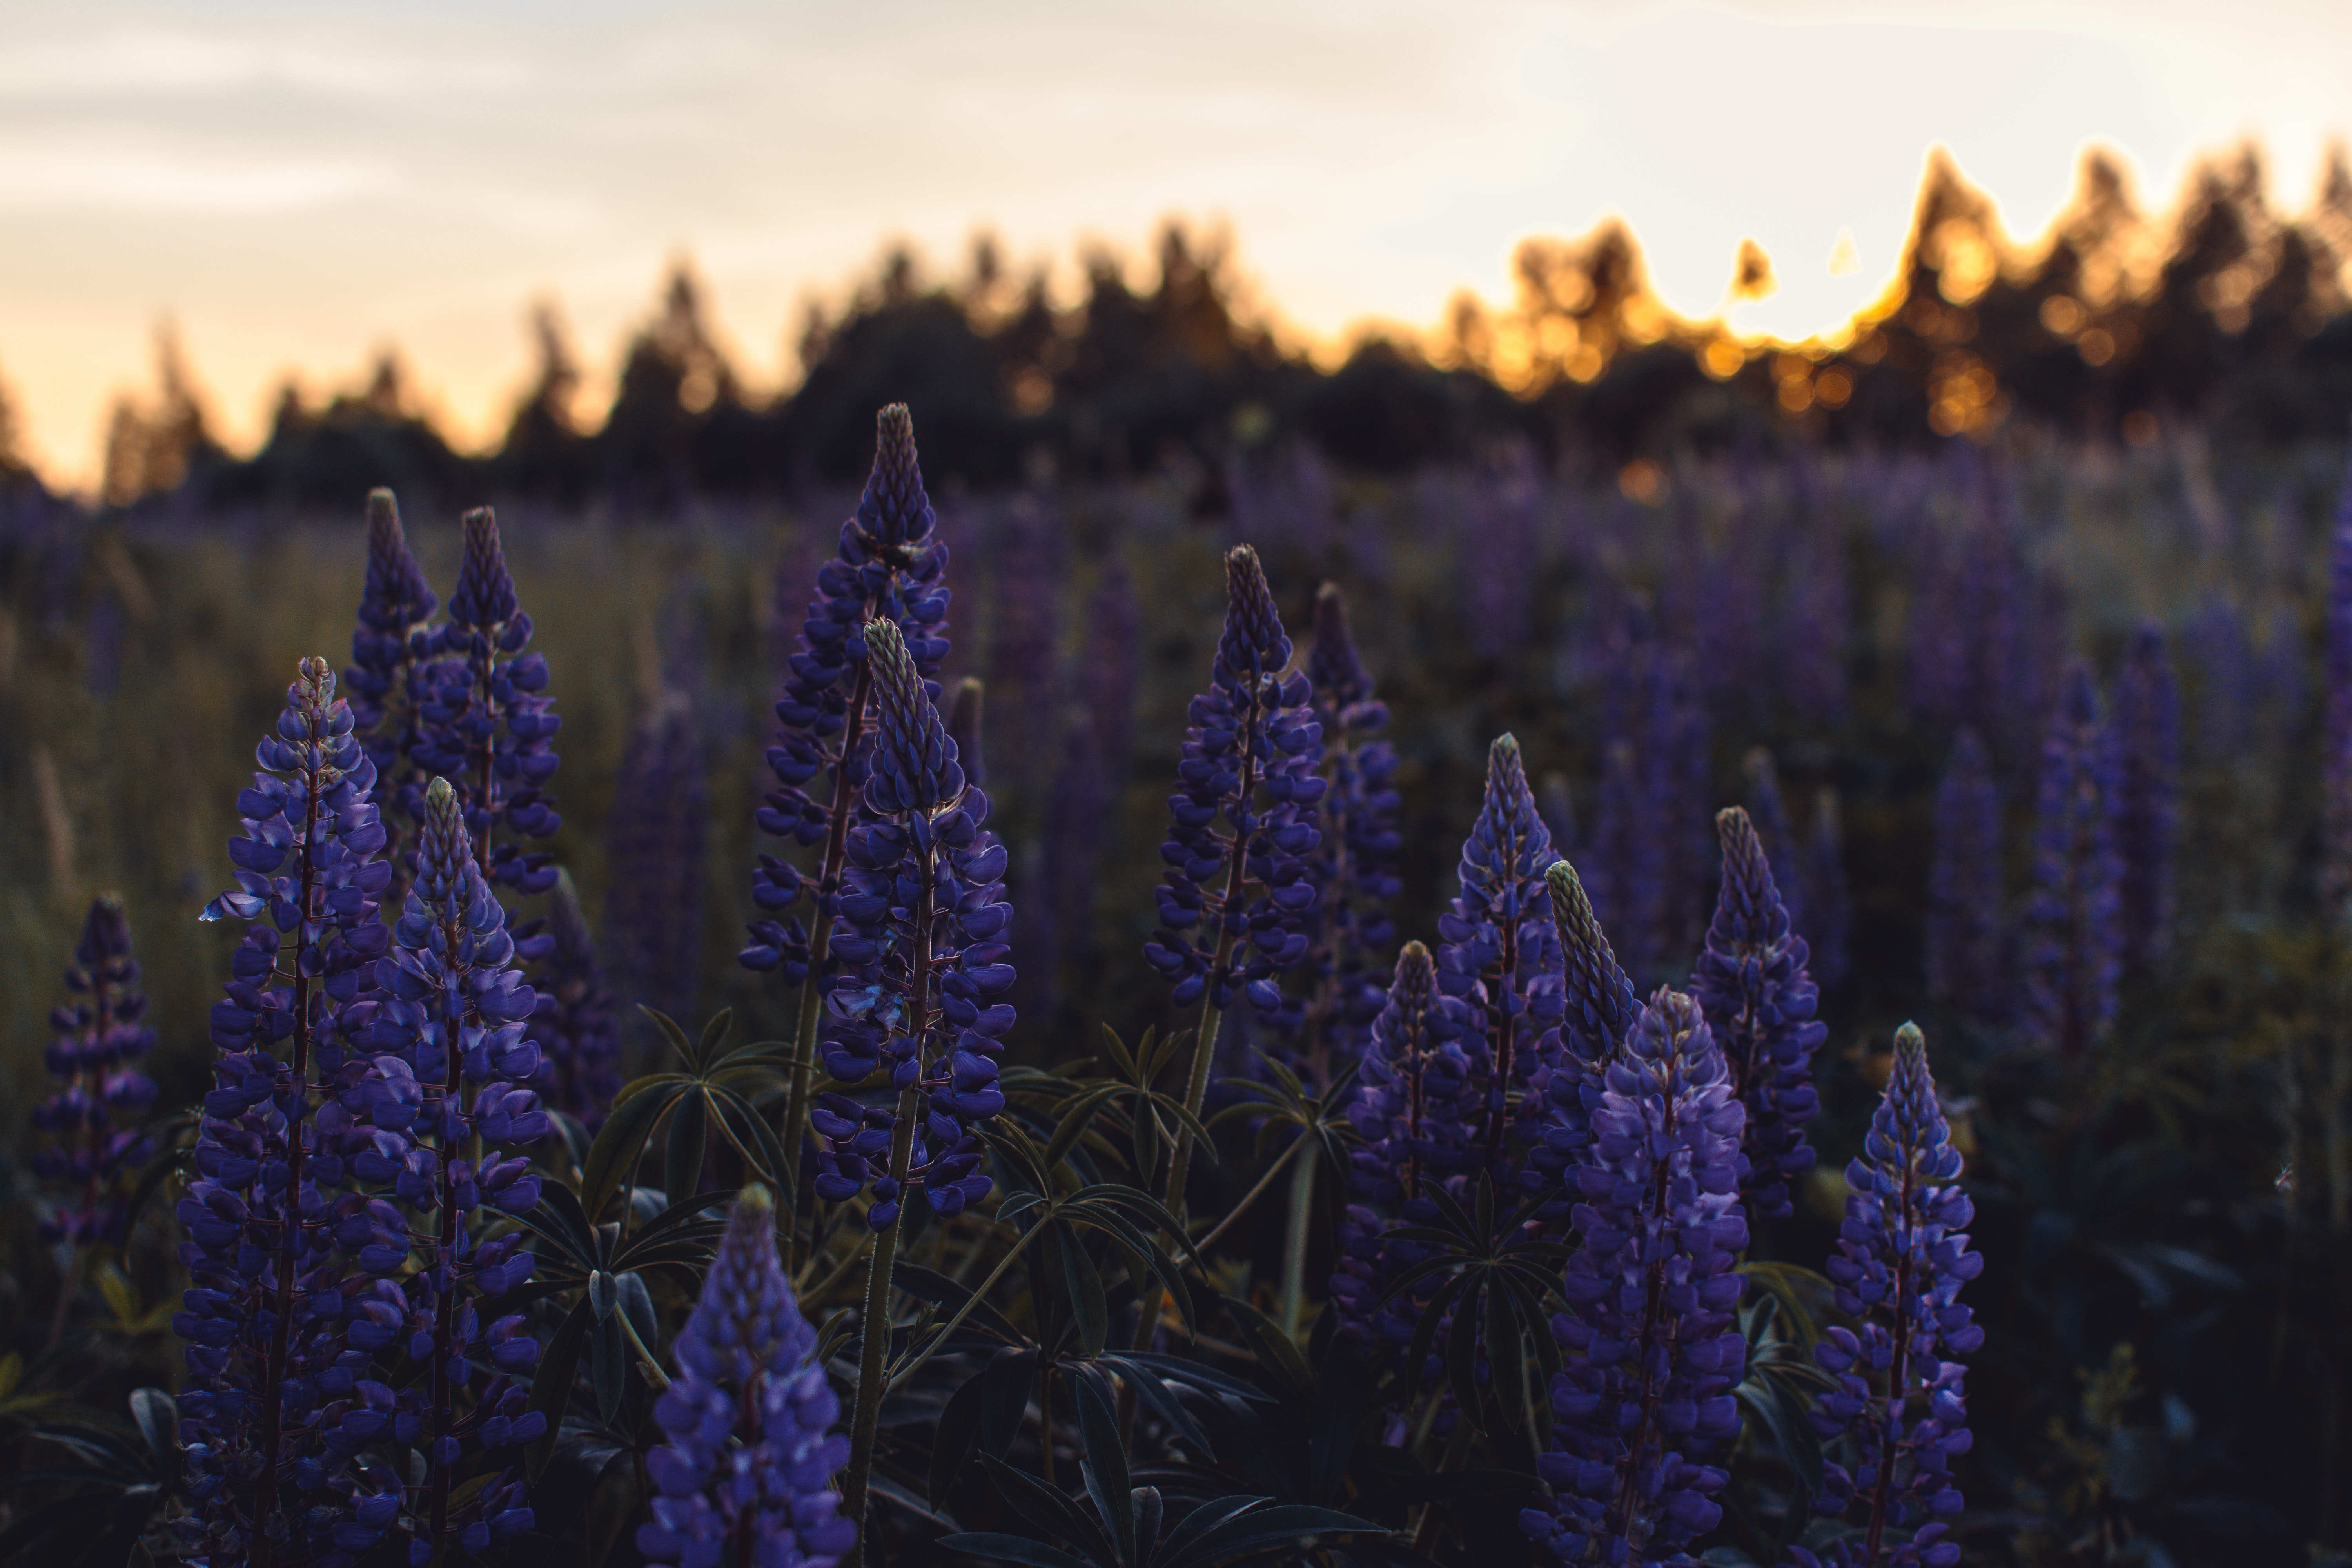 Purple Petaled Flowers, Hd wallpapers, Sunset, Silhouettes, Rural, HQ Photo